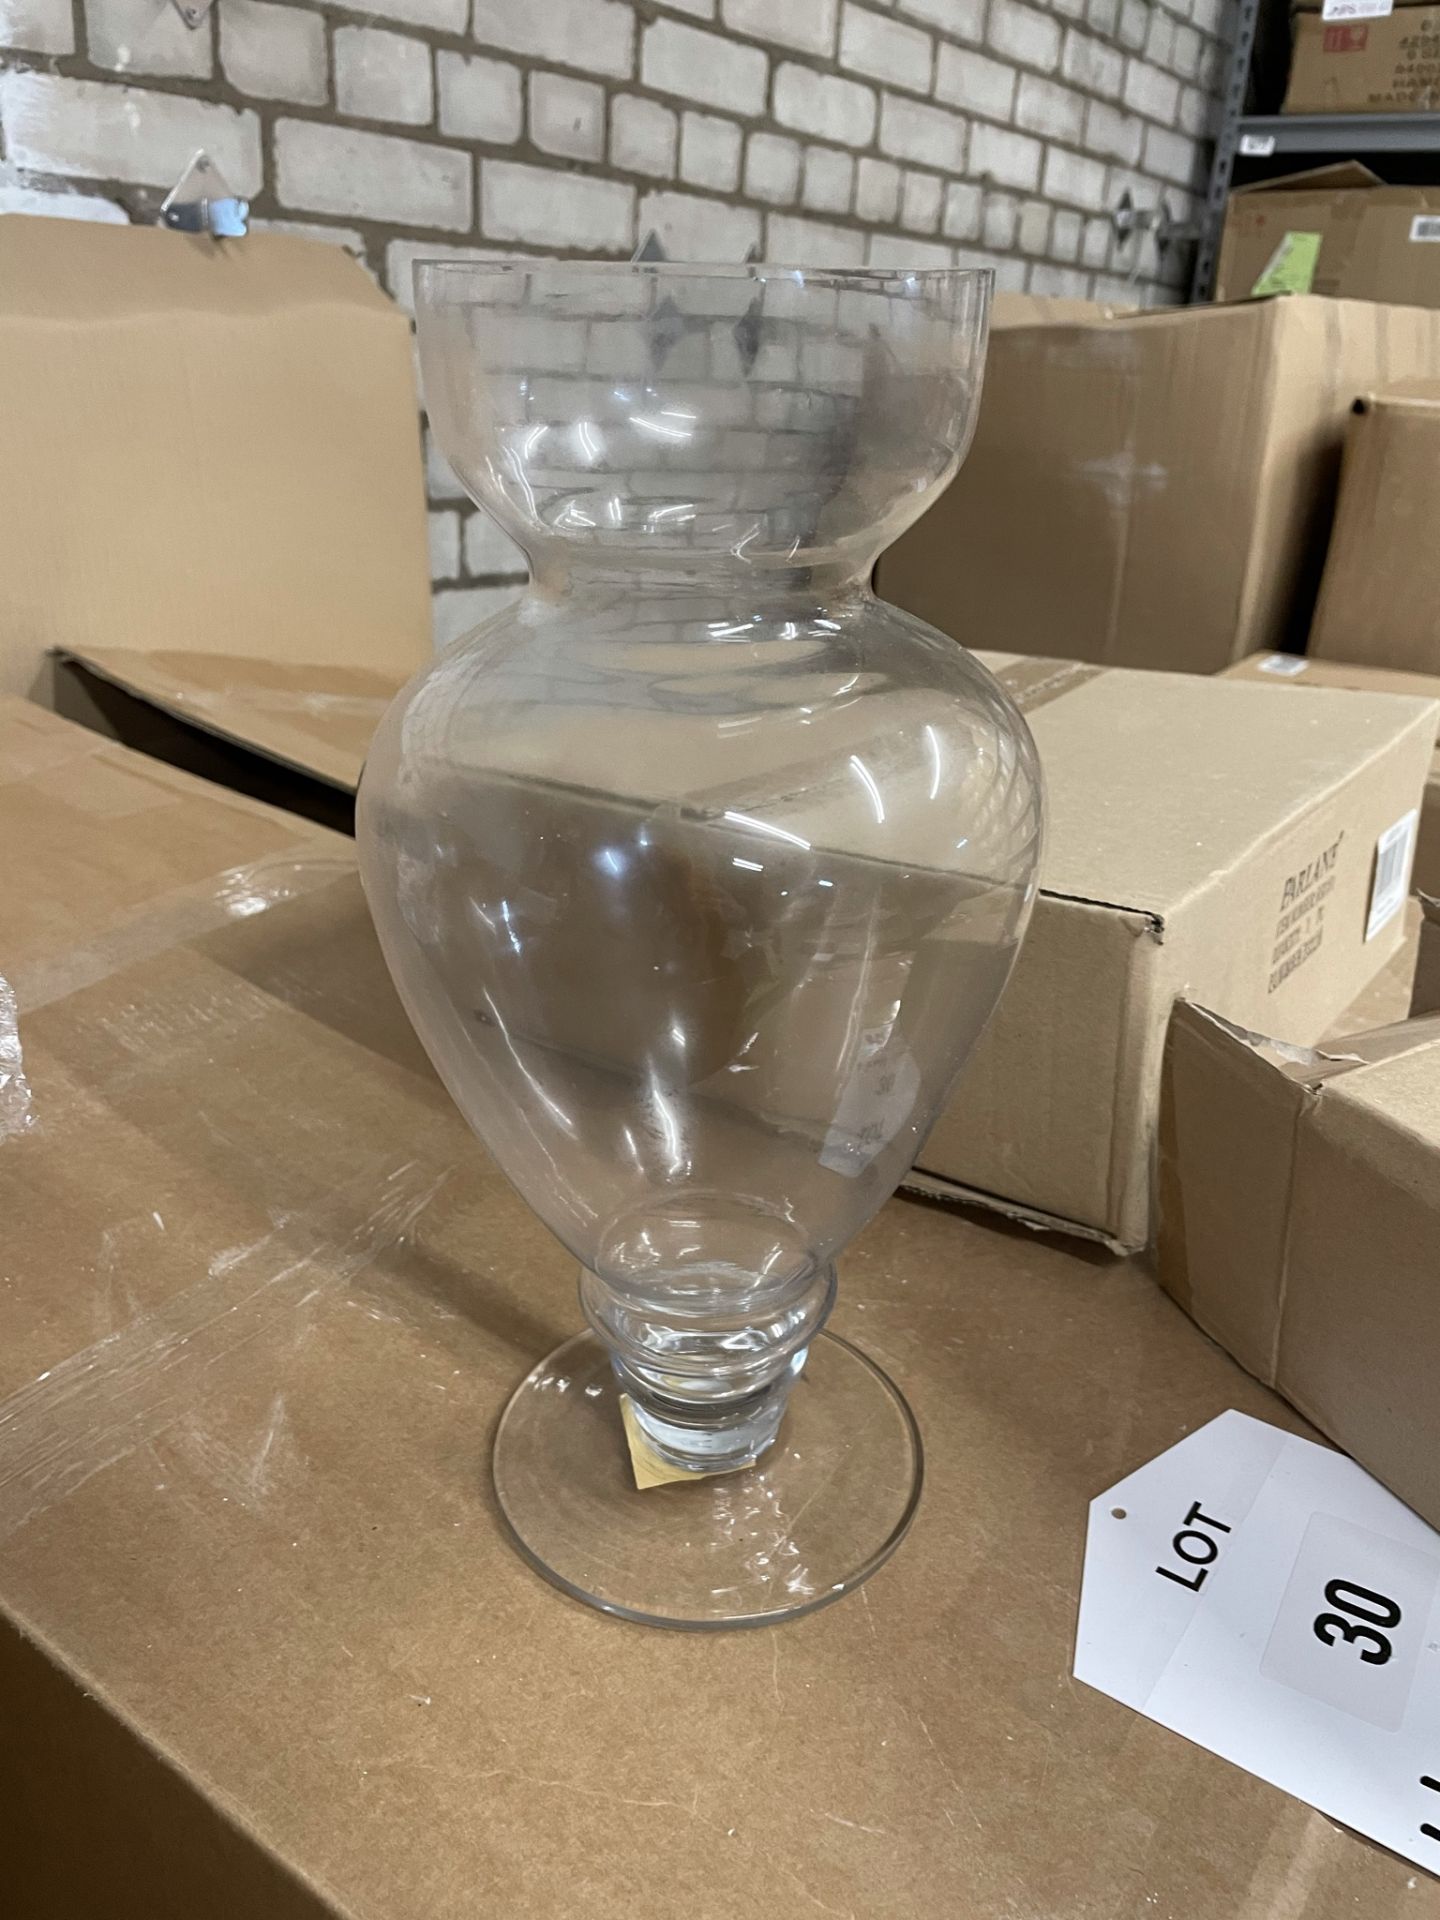 Large Quantity of Various Spare/Loose Glassware Items - Examples can be seen in pictures - Image 12 of 18